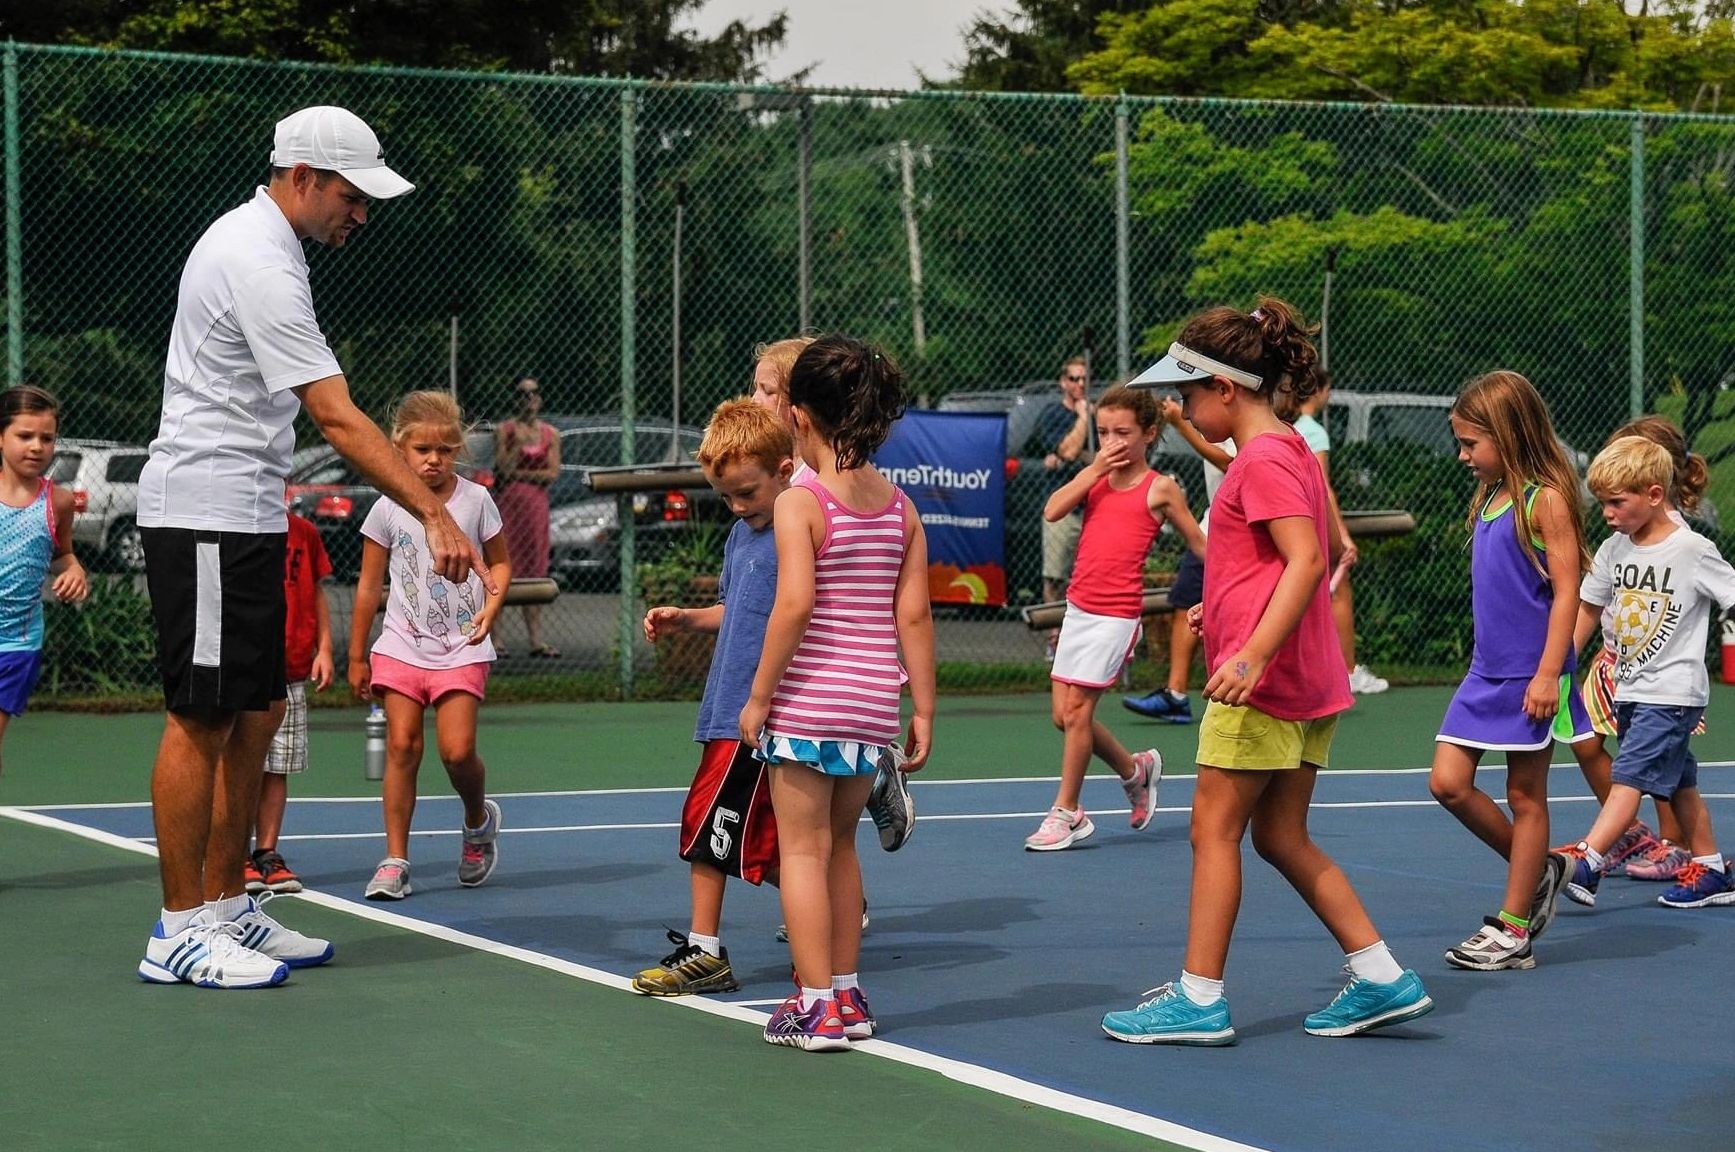 Junior Group Tennis Lessons in Bucks County